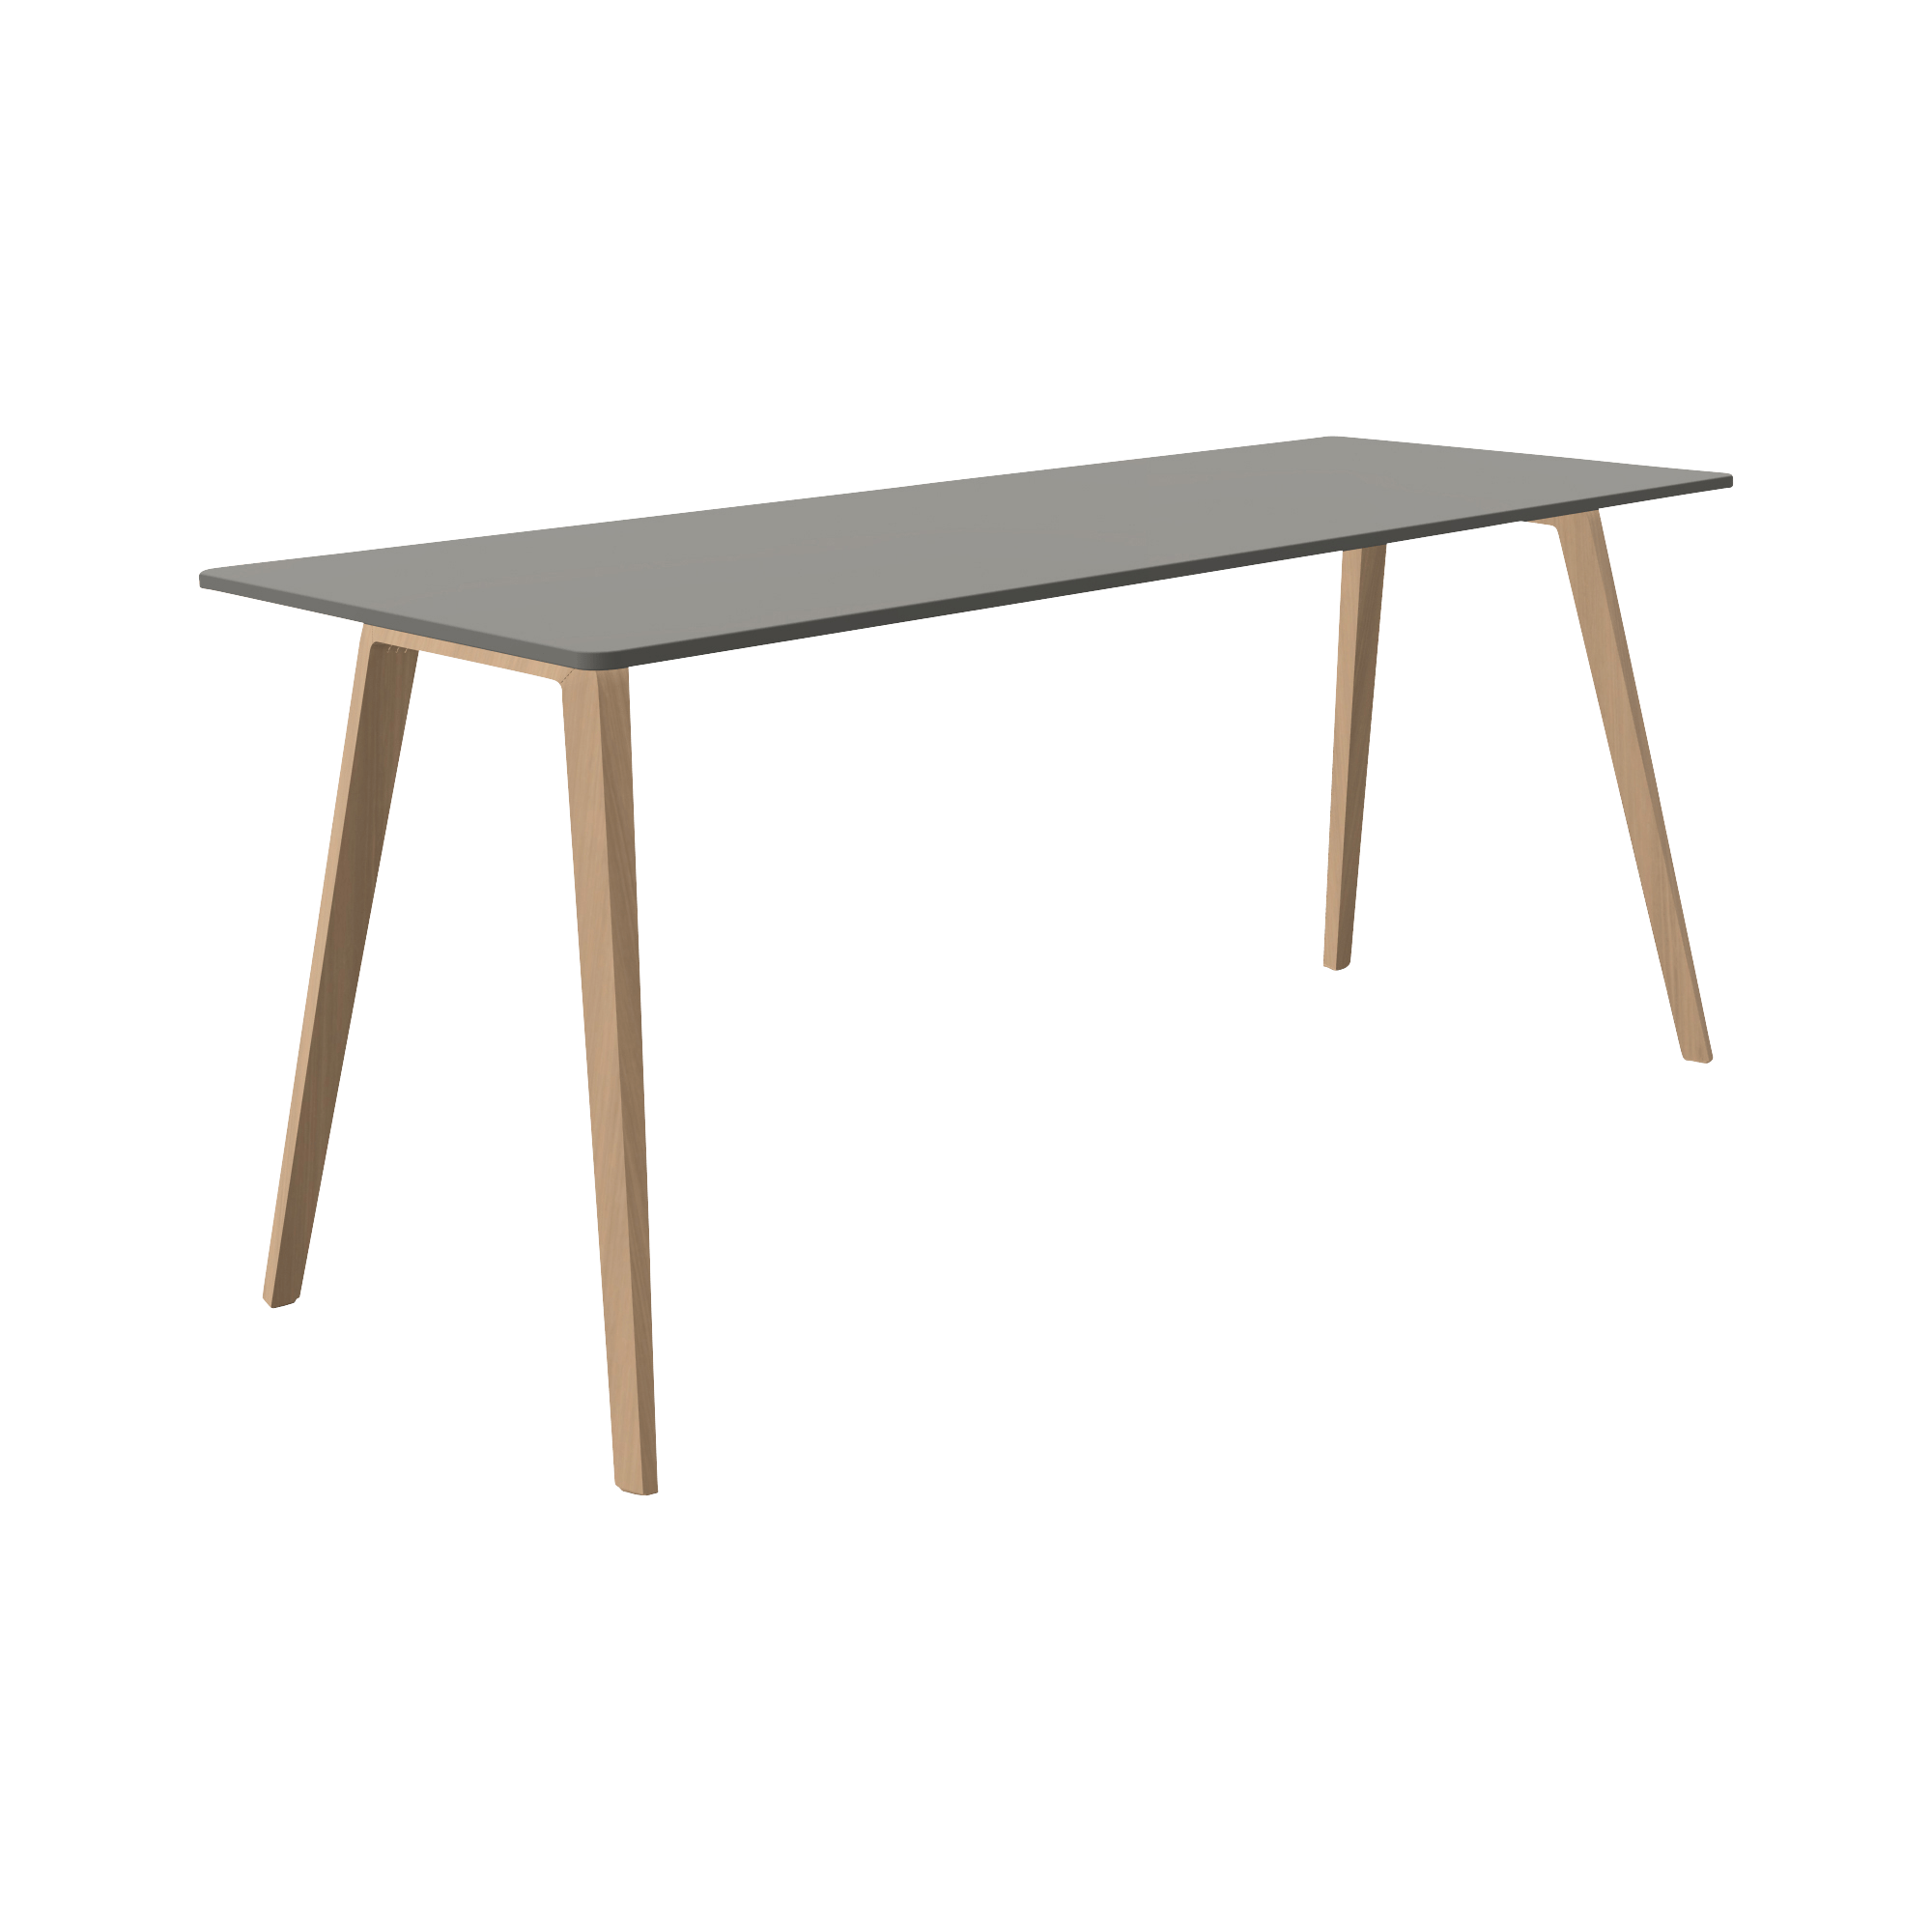 Grey, long rectangular table with 4 wooden legs